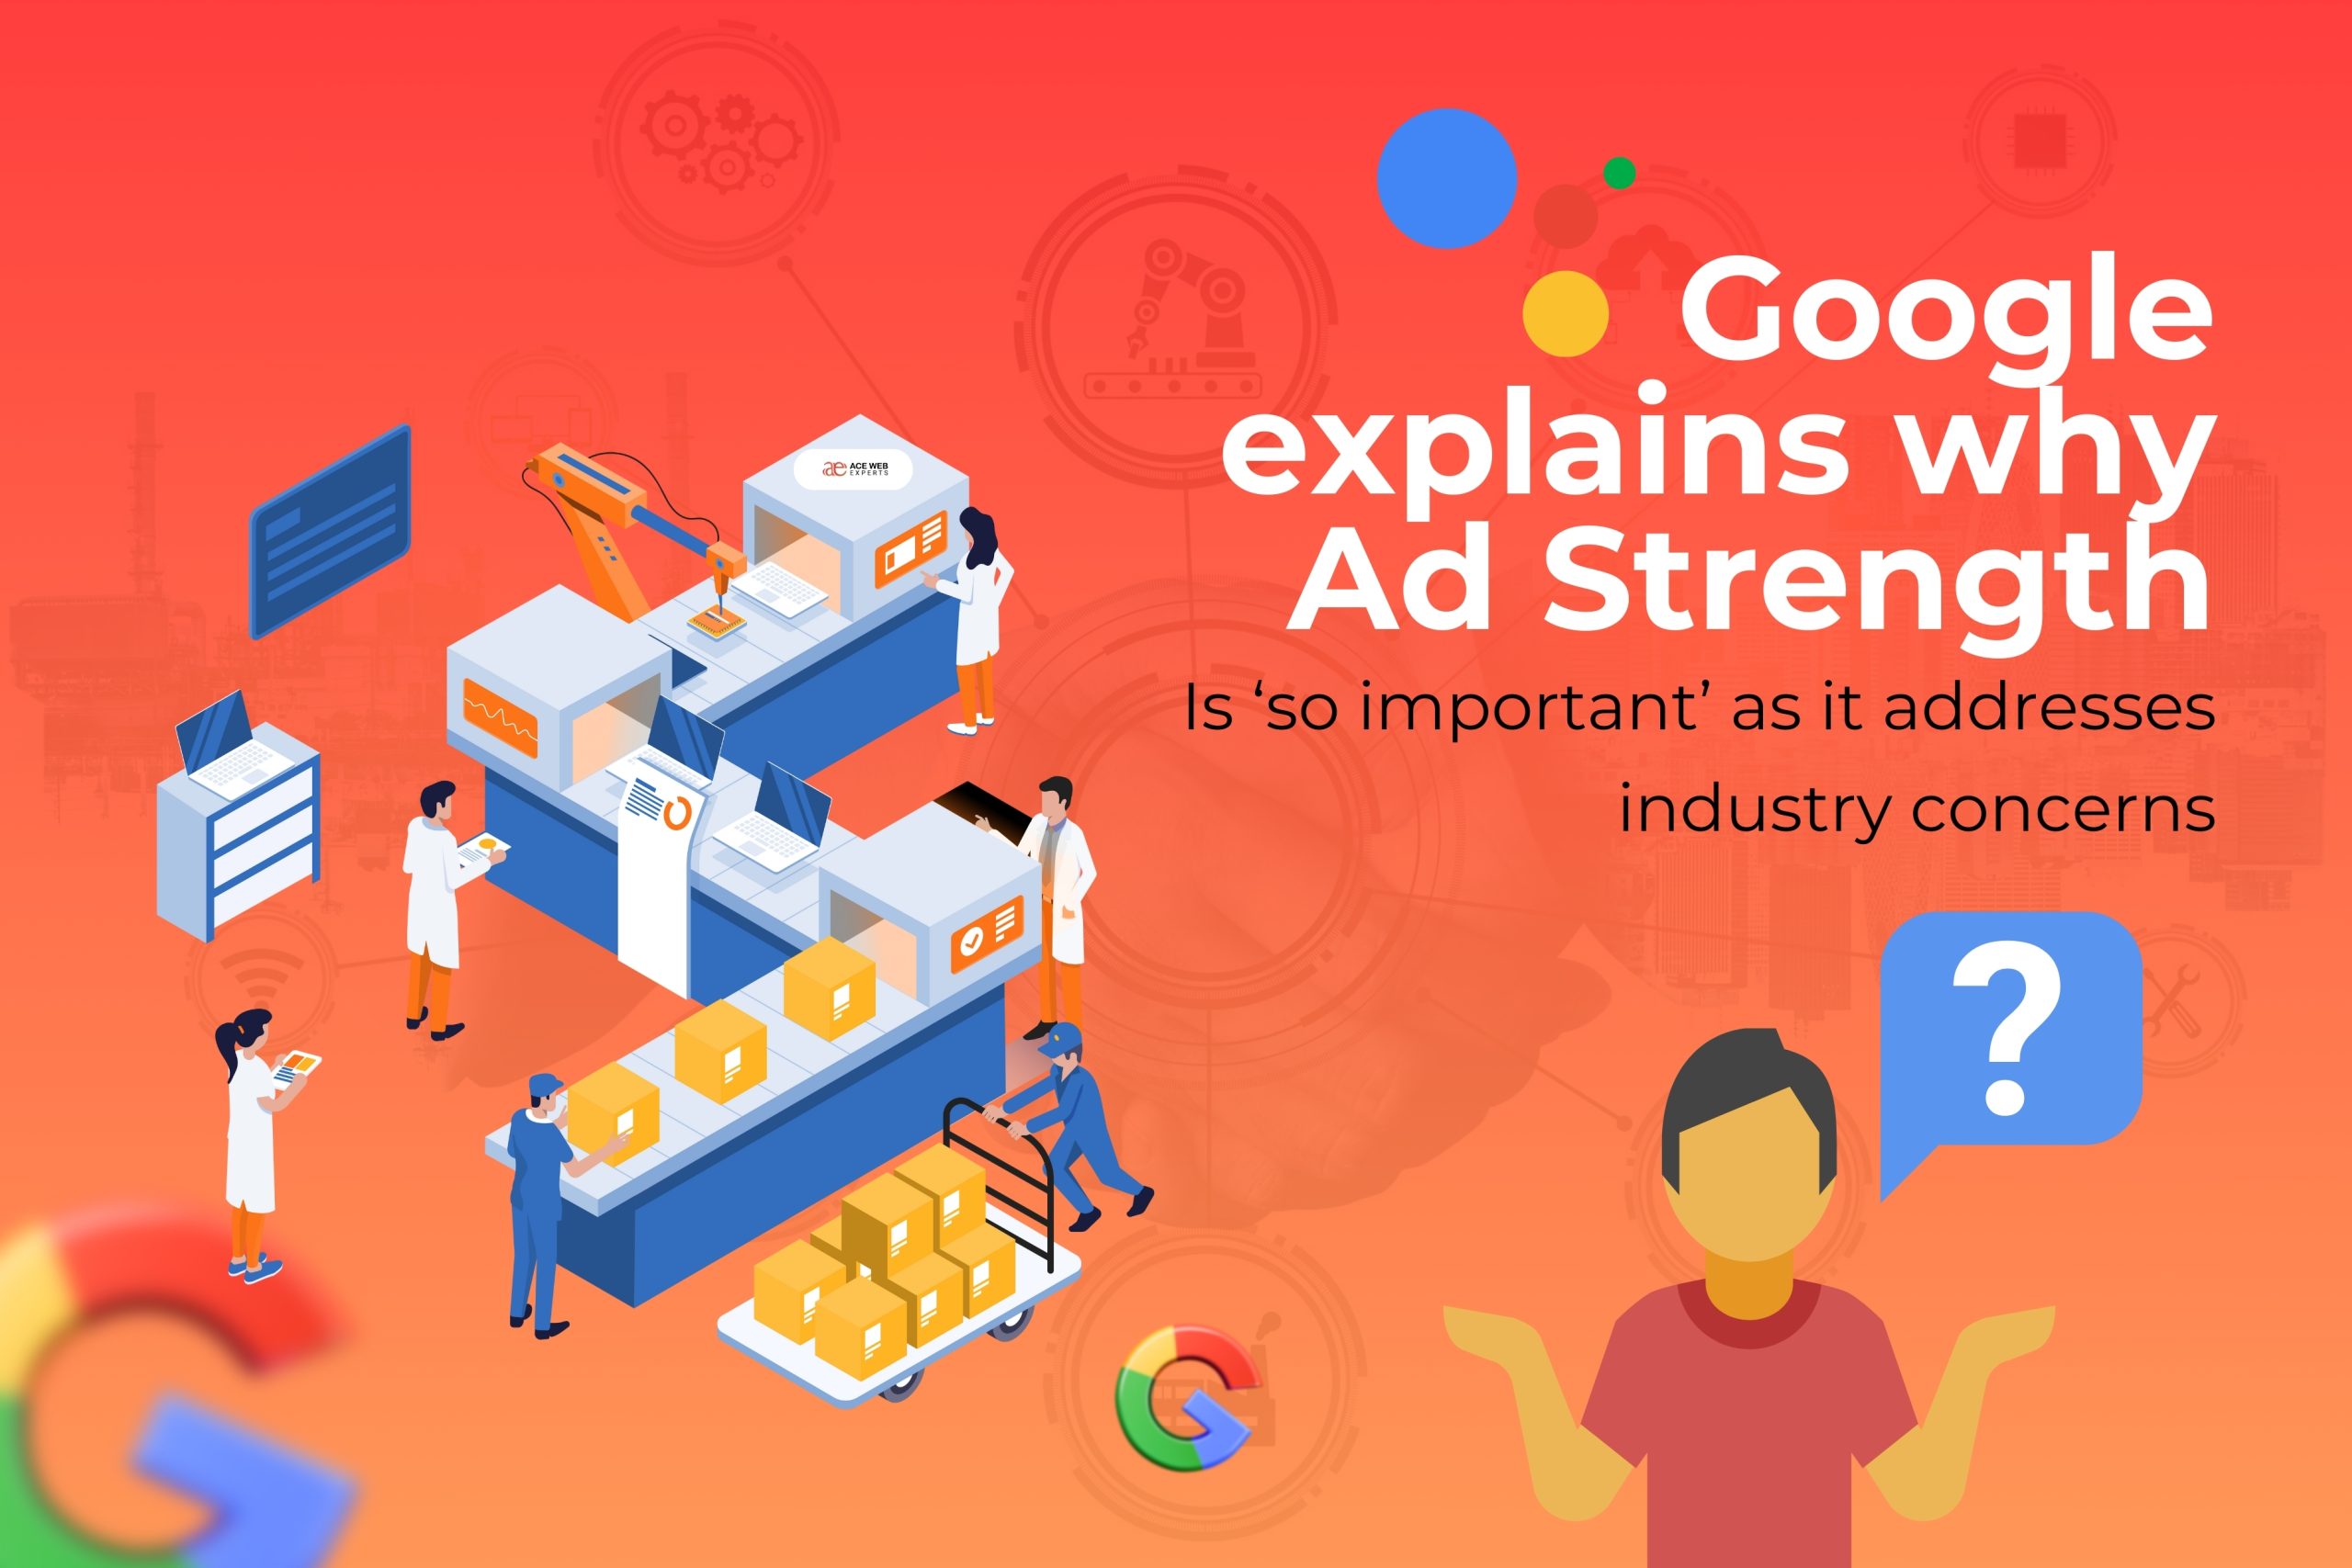 Google explains why Ad Strength is so important